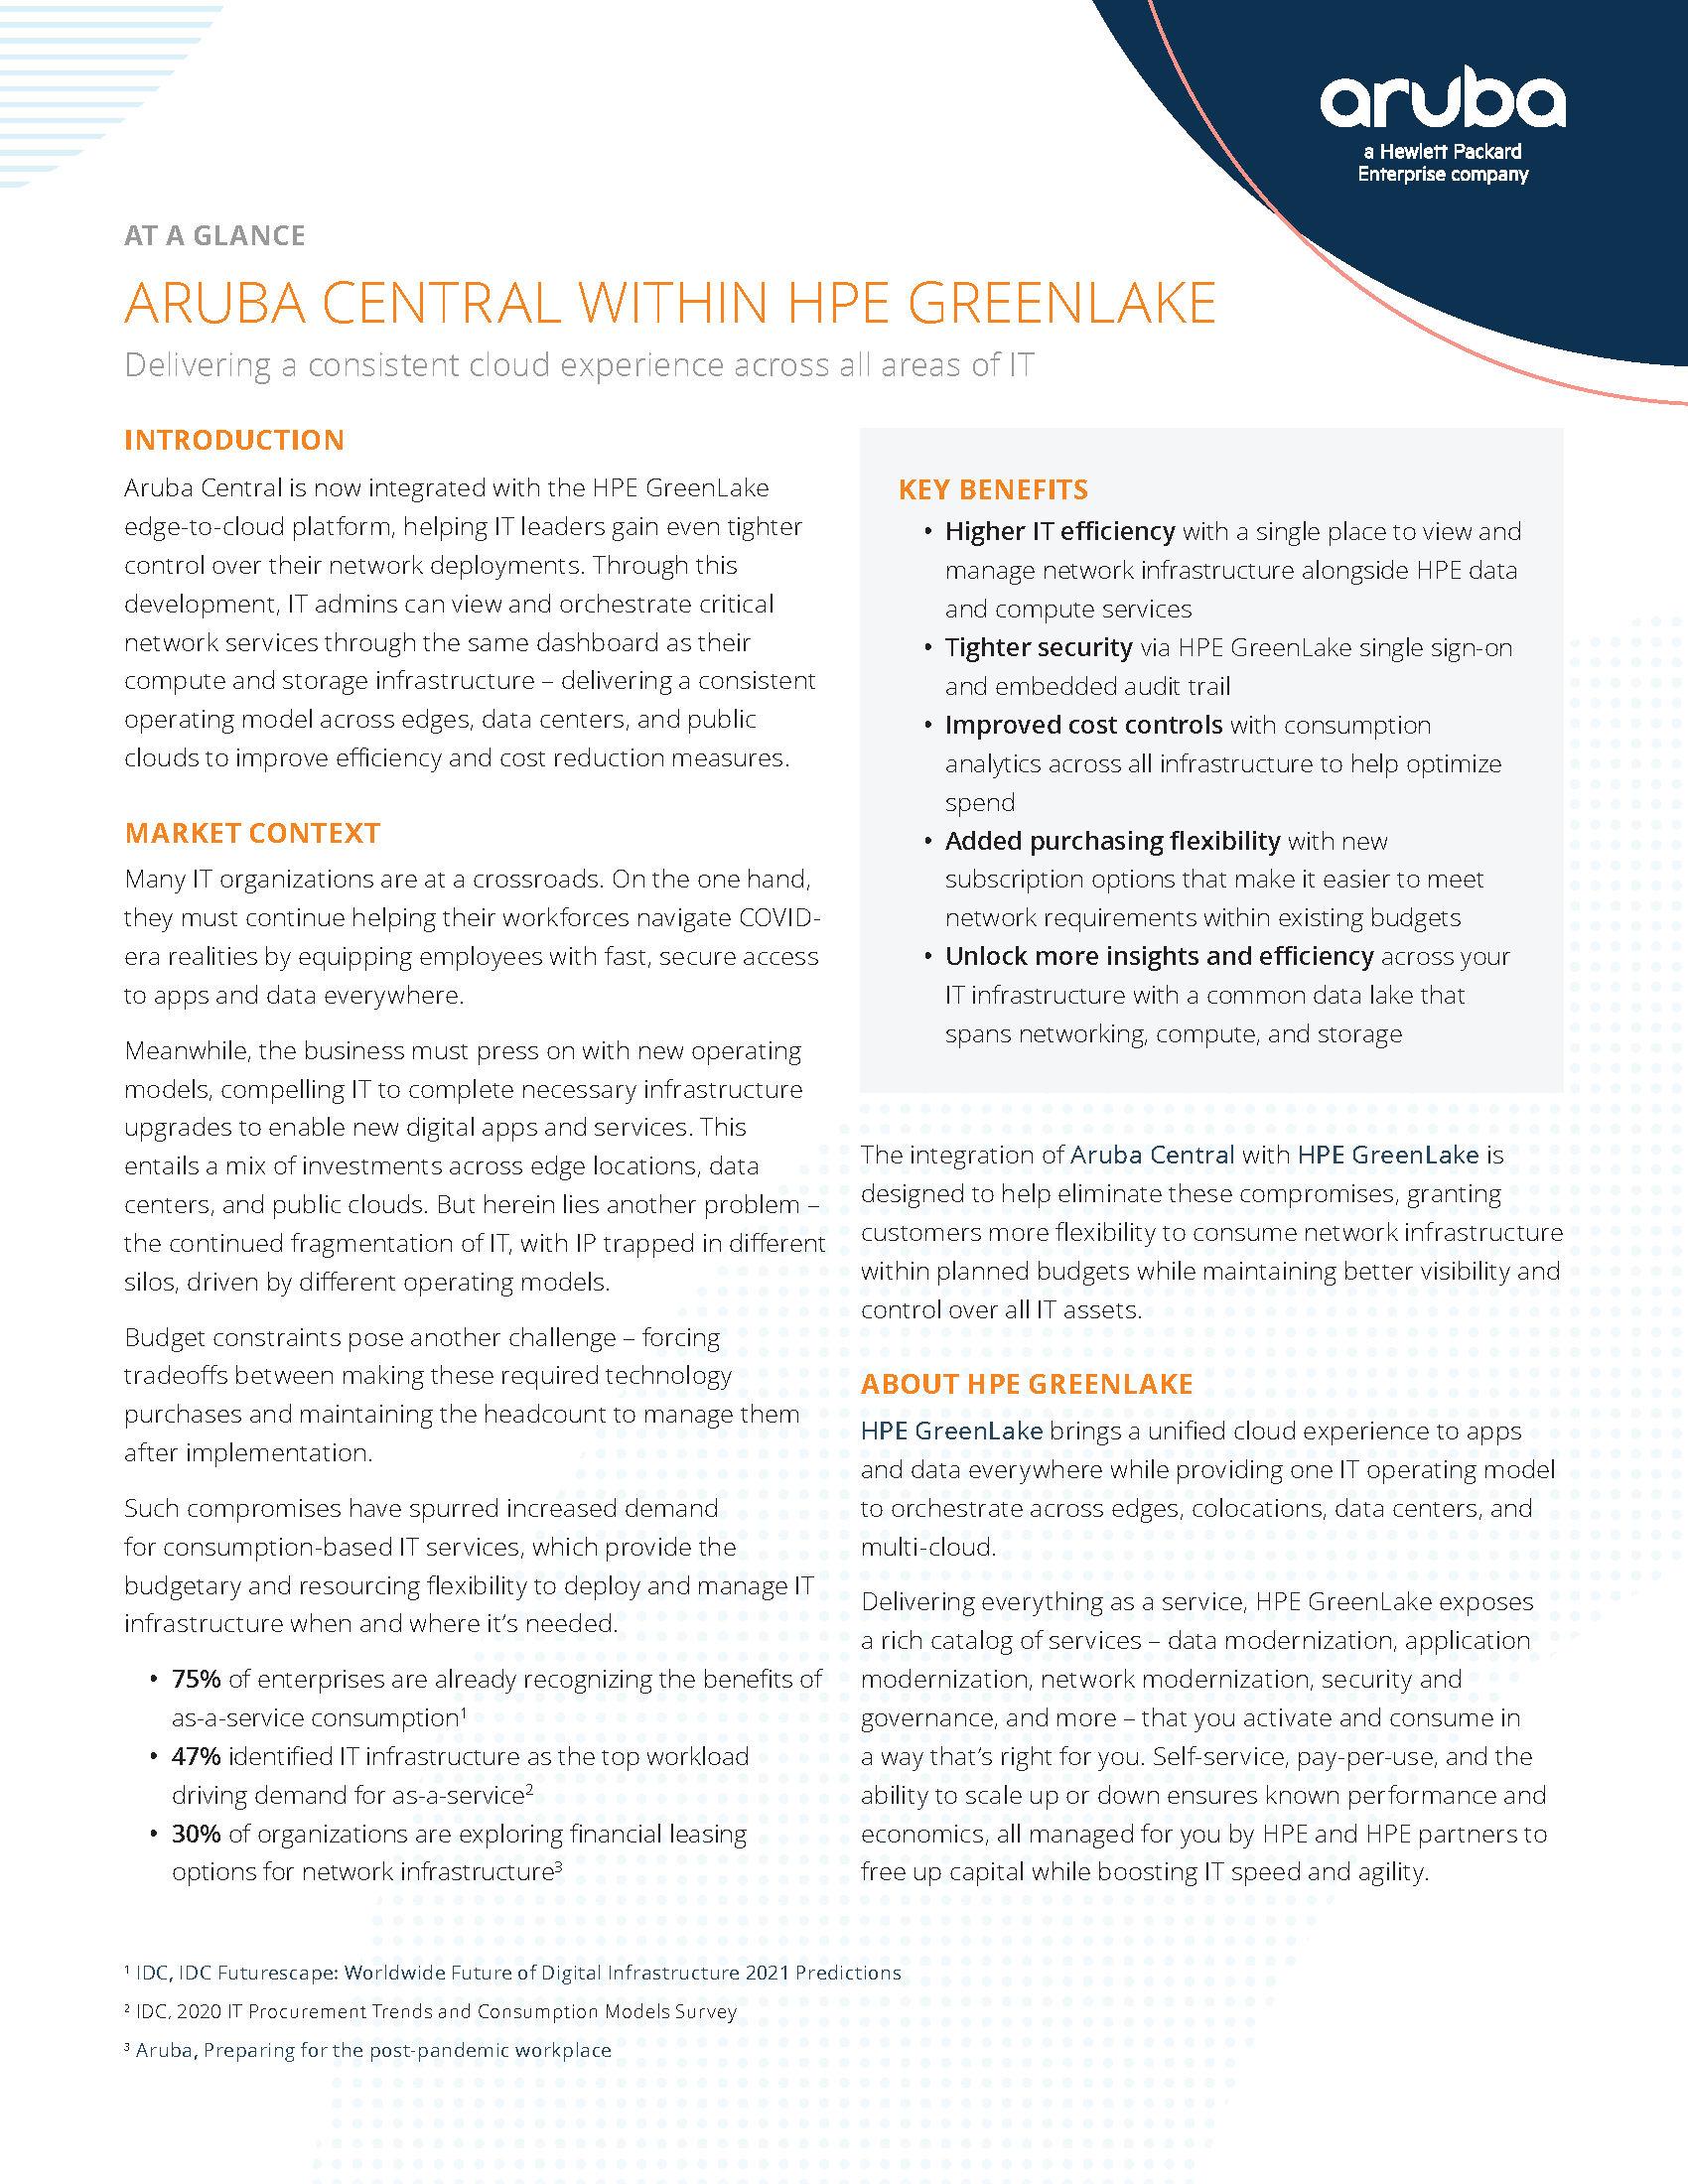 AAG_Aruba-Central-within-HPE-GreenLake_Page_1